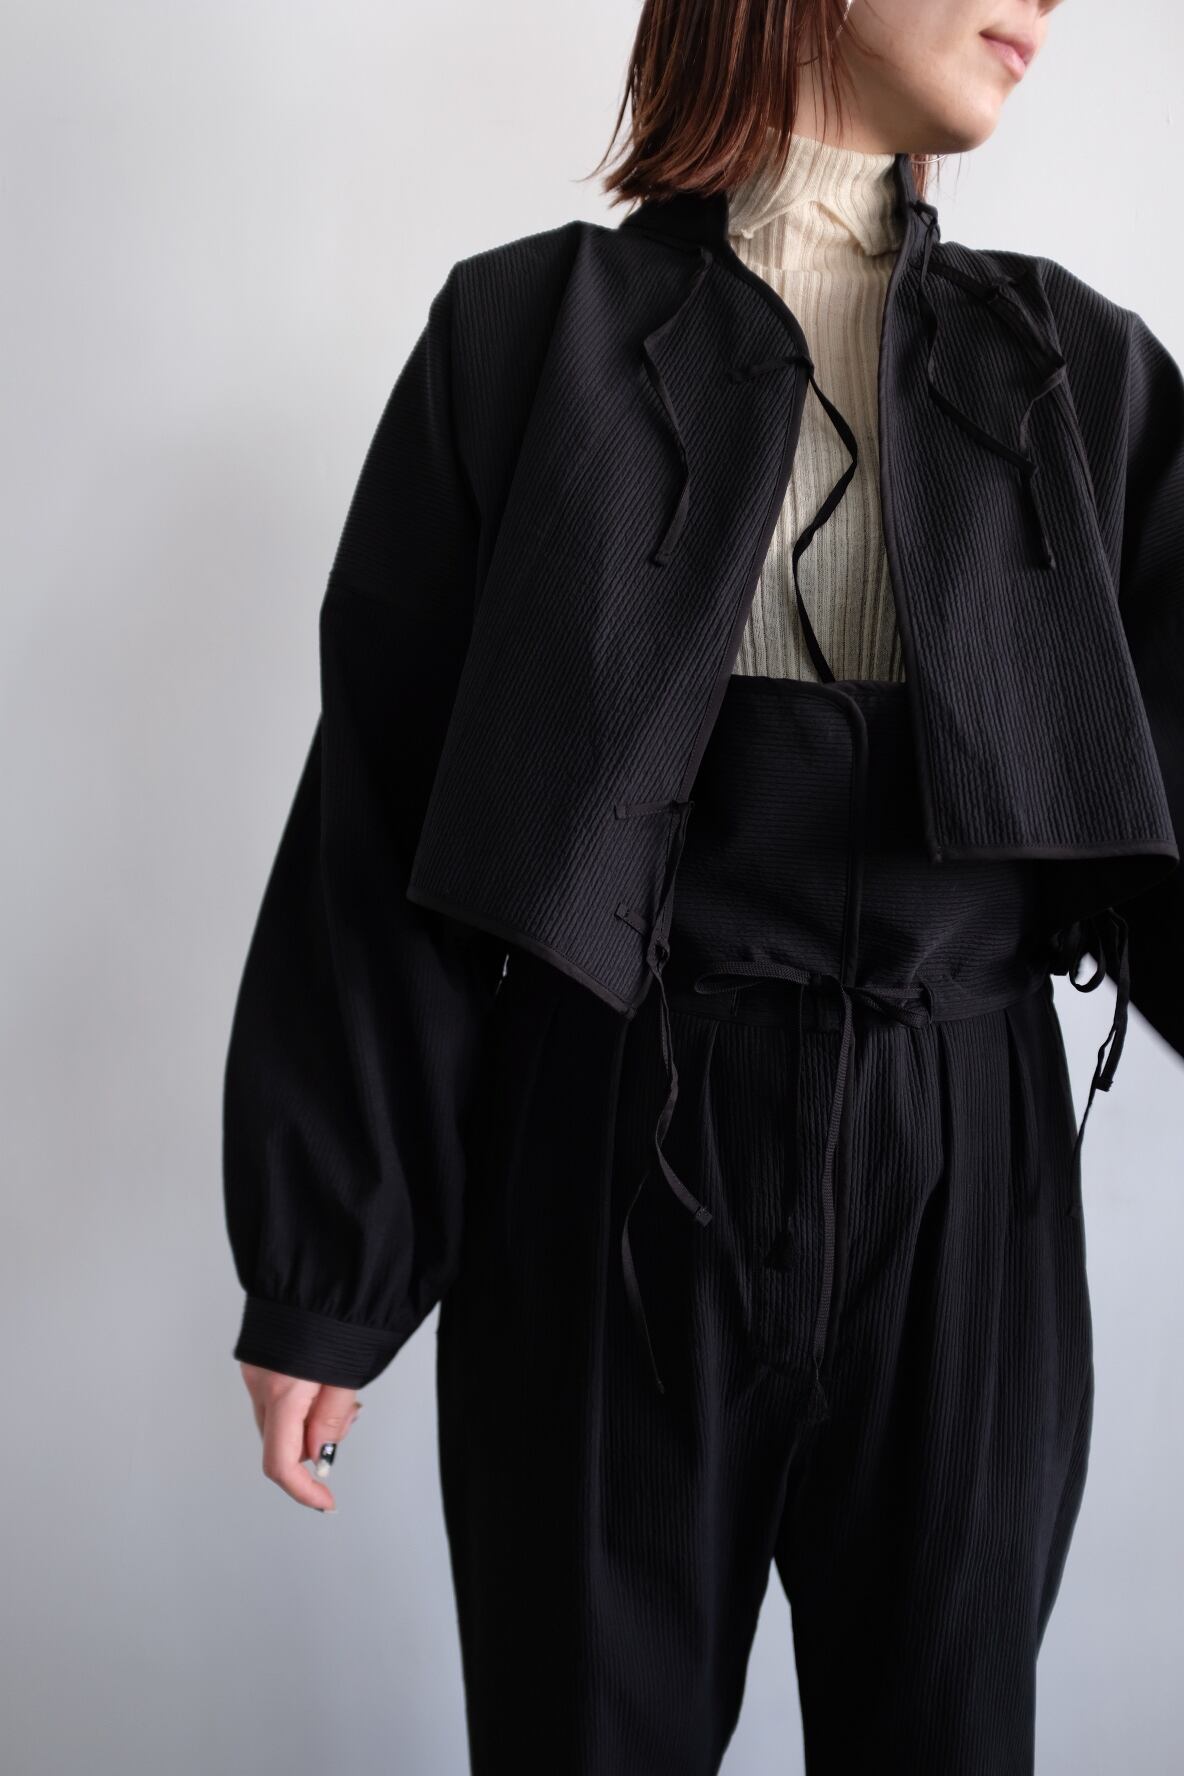 [WRYHT]ORIENTAL FRONT CROPPED JACKET BLACK | YES-姫路の美容院と服のお店YES(イエス)です。  powered by BASE